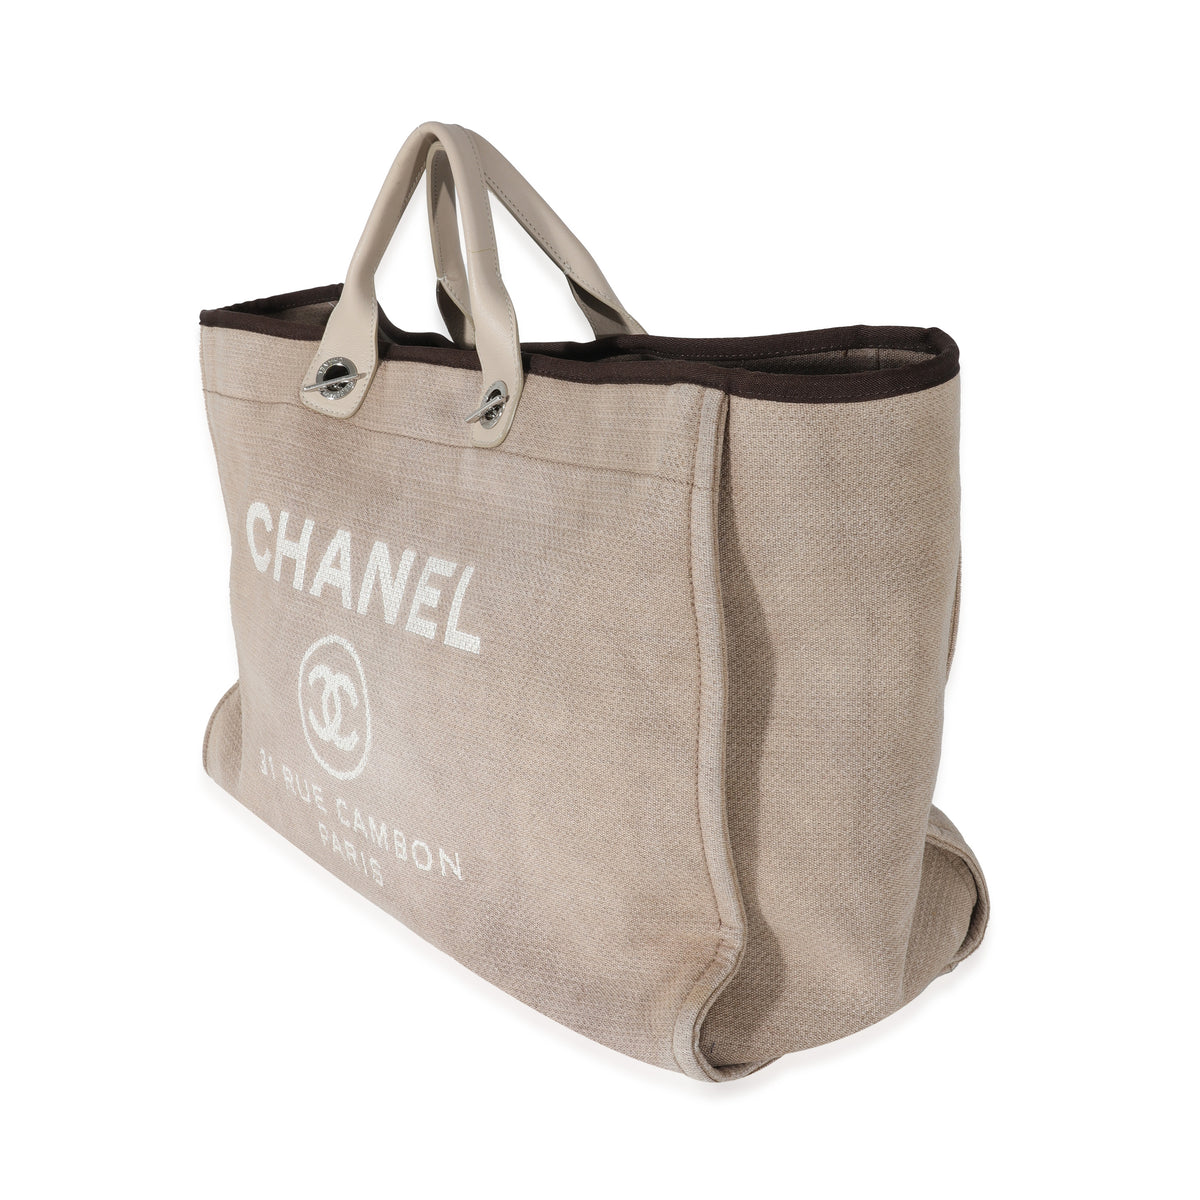 Chanel Beige Canvas Large Deauville Tote